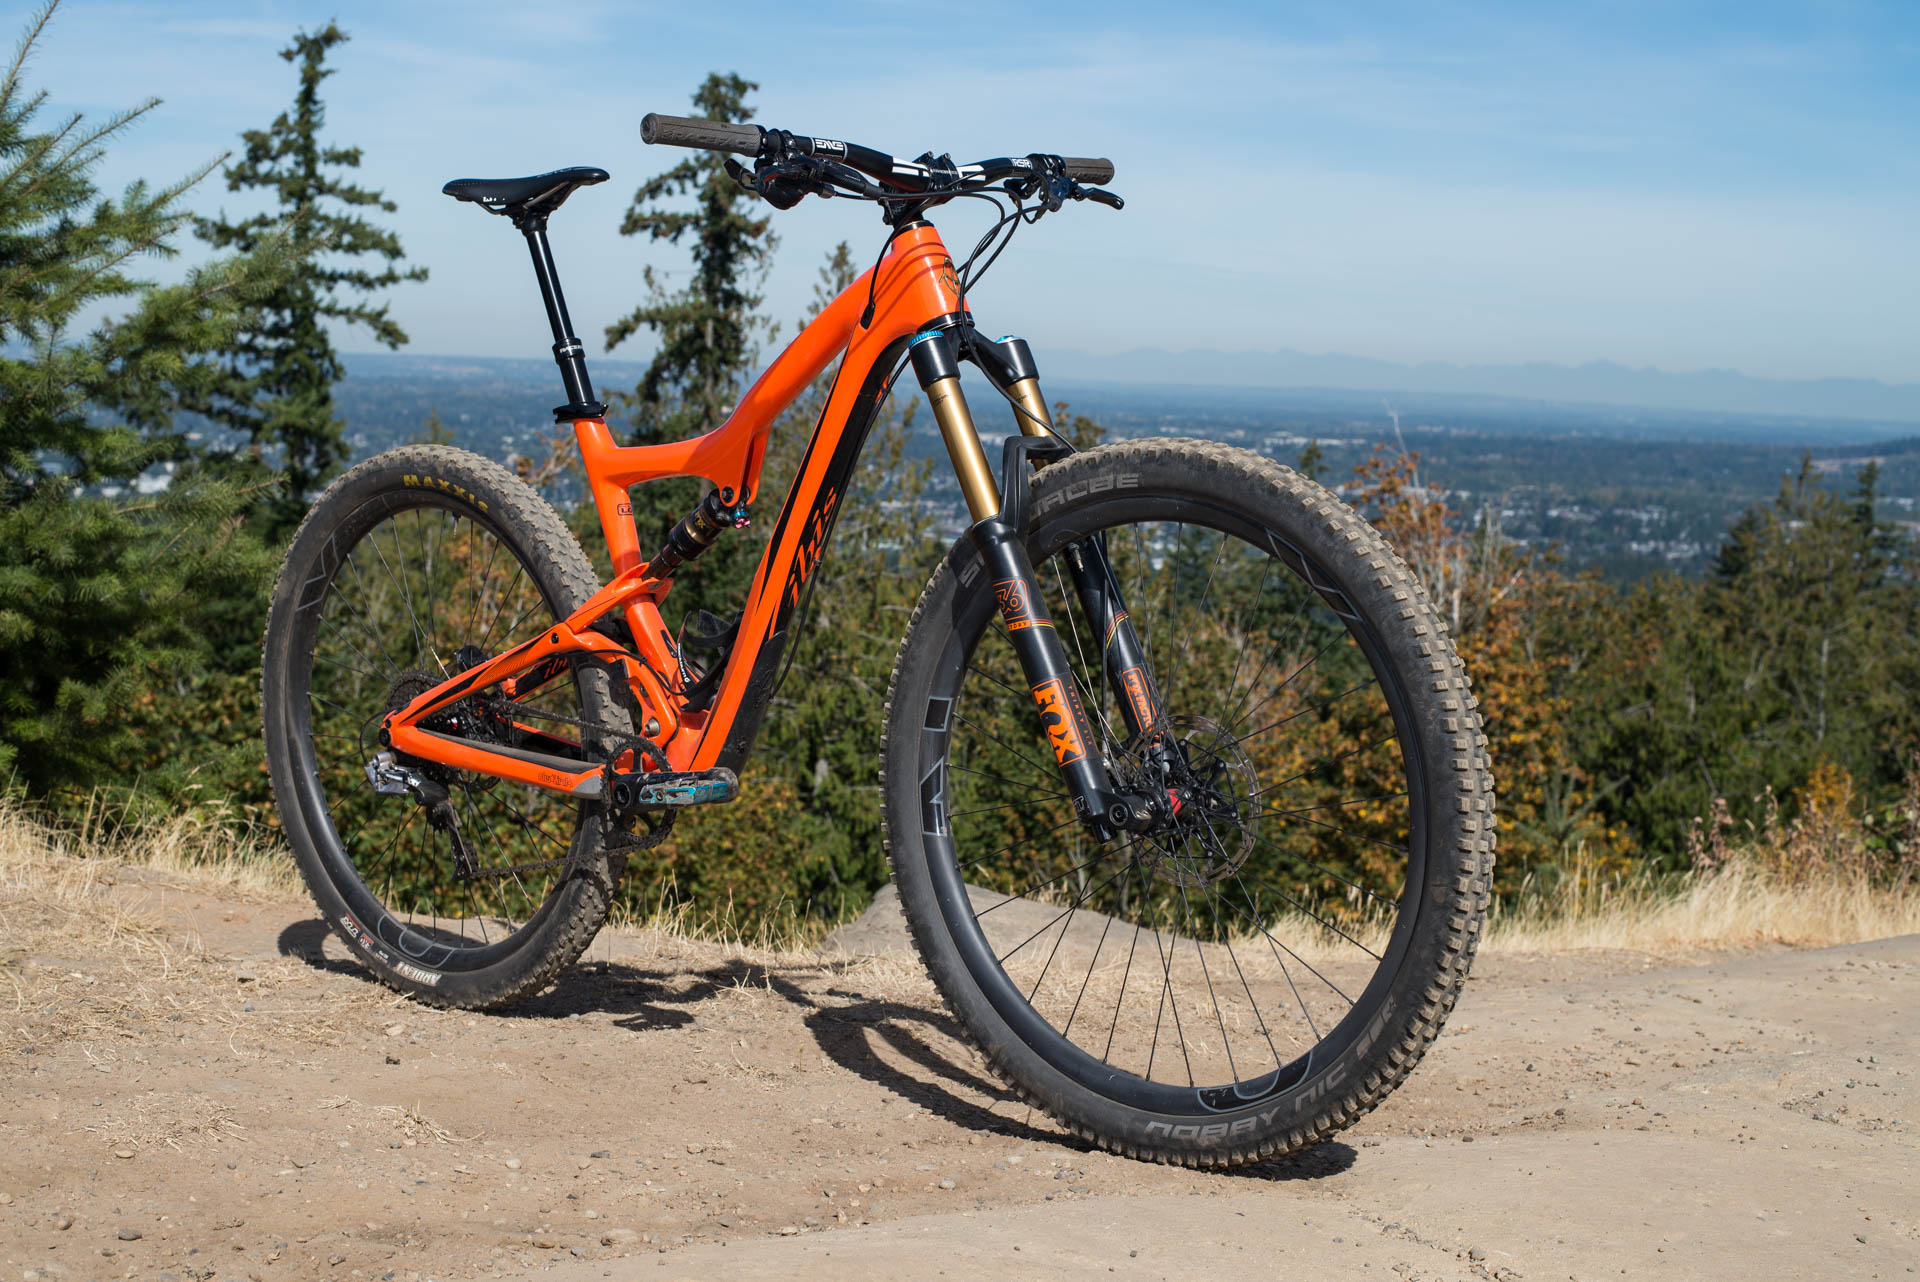 The Ibis Ripley LS builds upon the original Ripley to create a Long and Slack machine that loves to descend just as much as it likes to climb